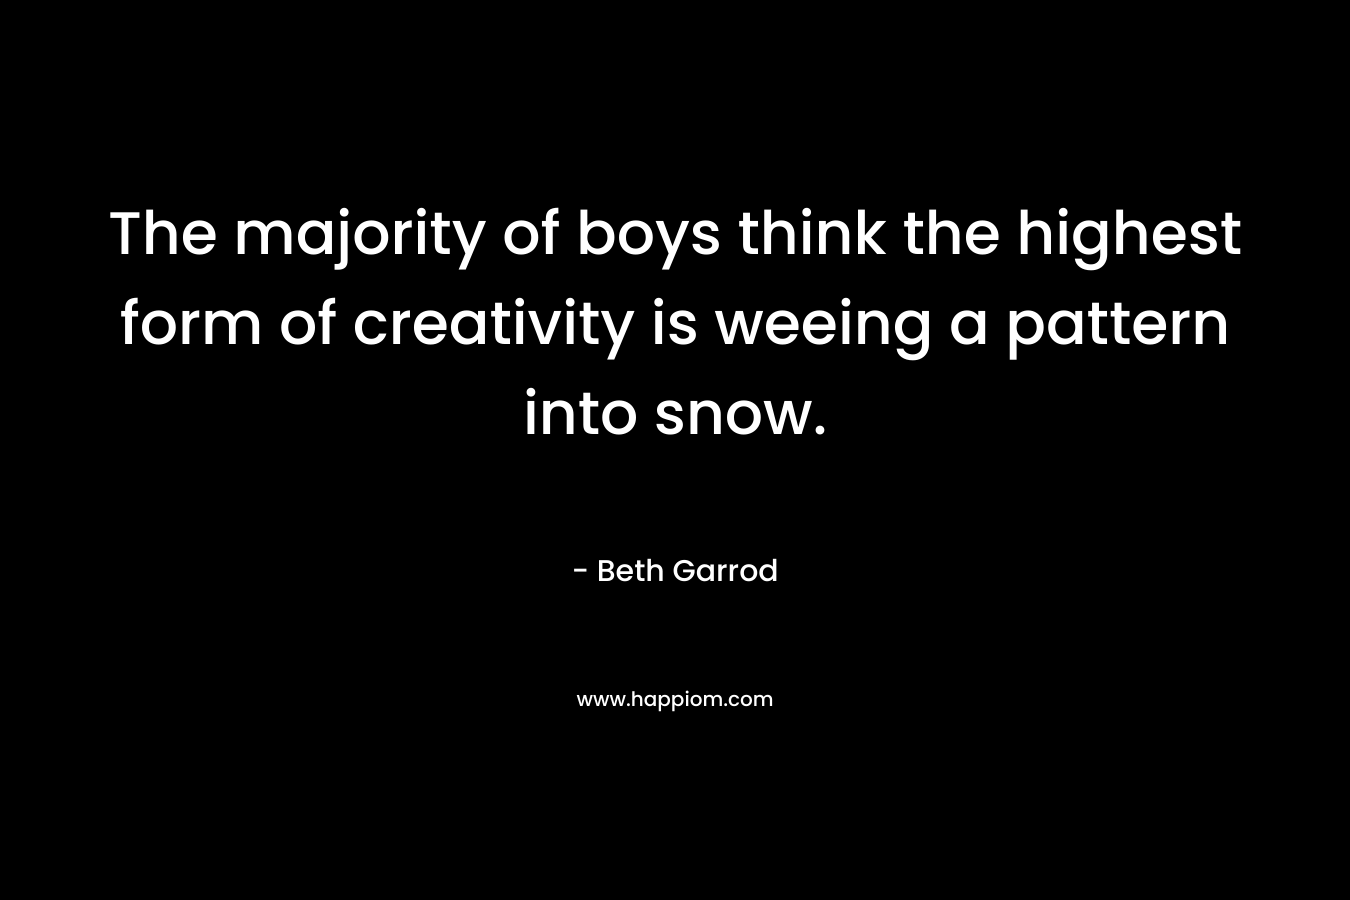 The majority of boys think the highest form of creativity is weeing a pattern into snow. – Beth Garrod